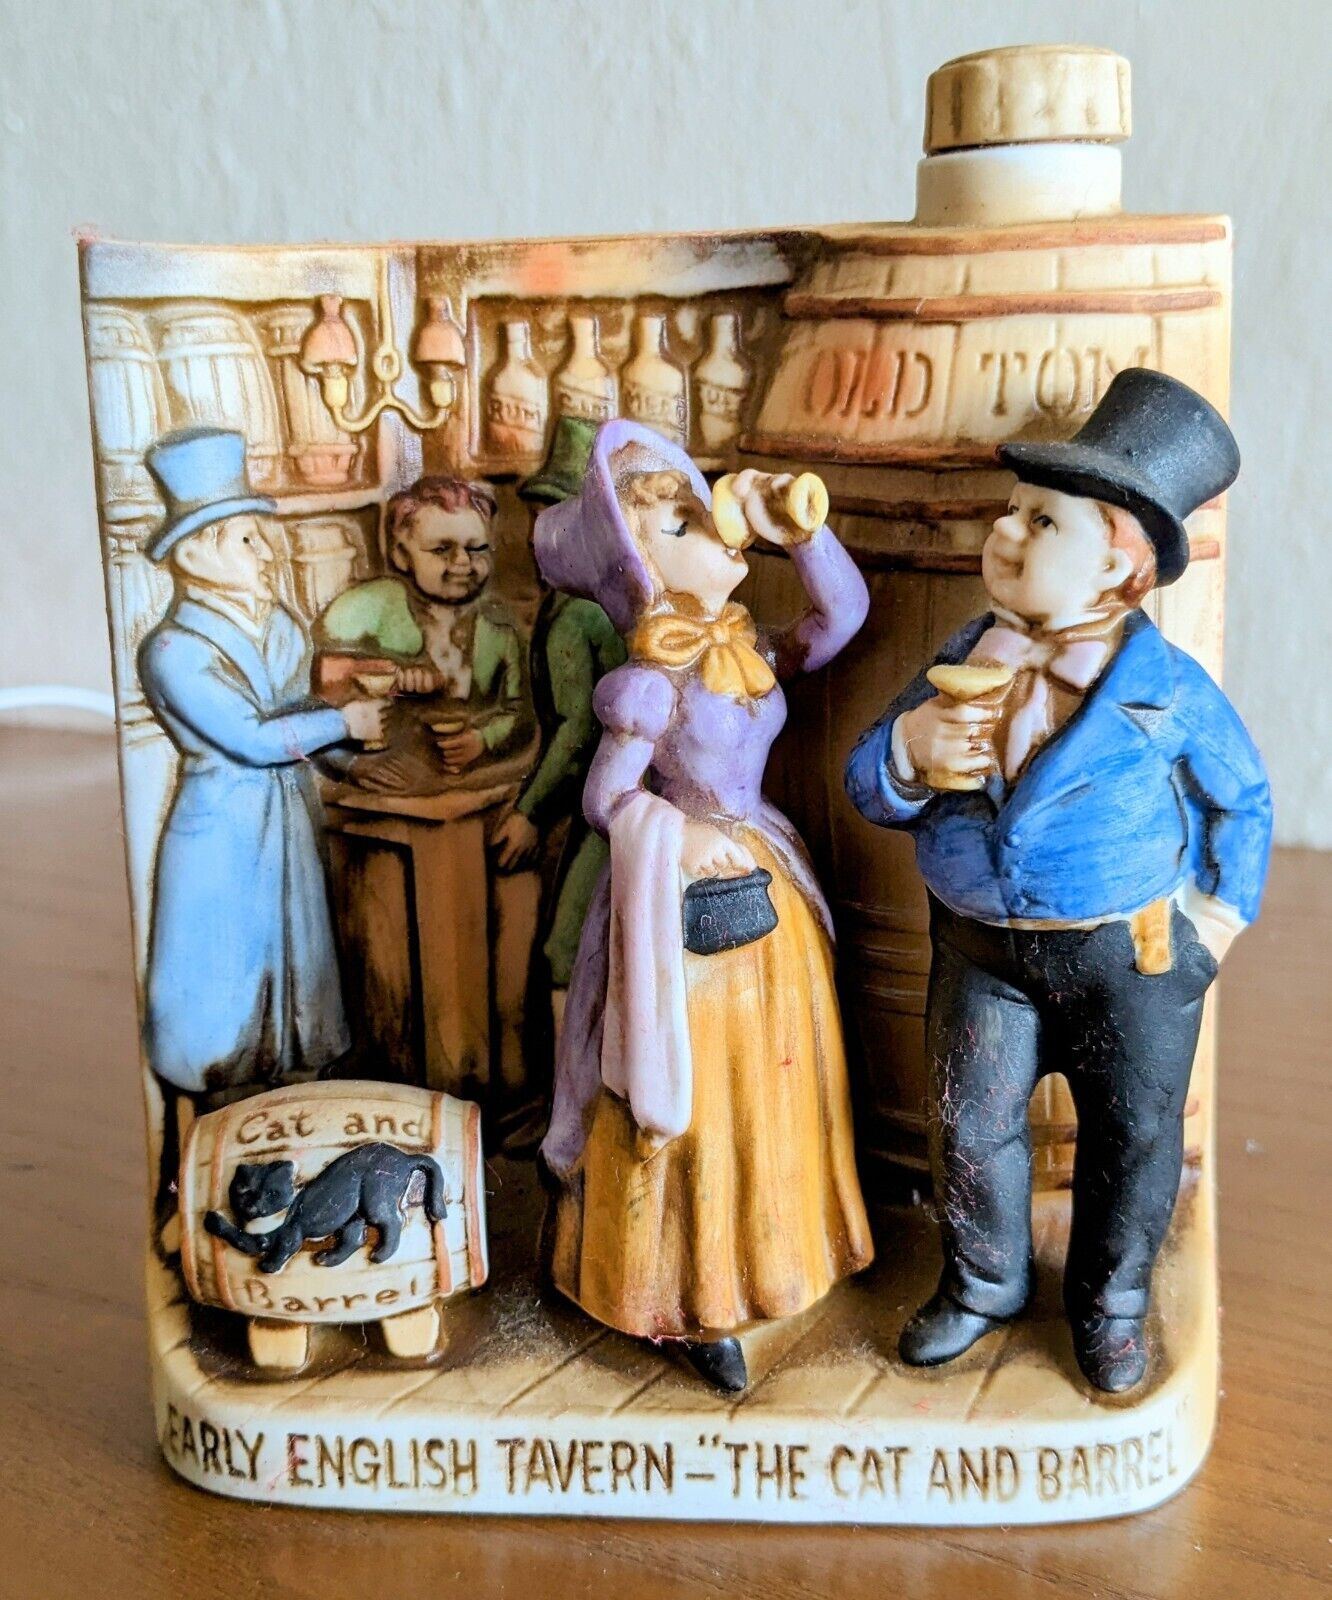 Vintage Boords 3D Whiskey Decanter Ceramic Cat & Barrell Tavern Old Tom Gin WOW